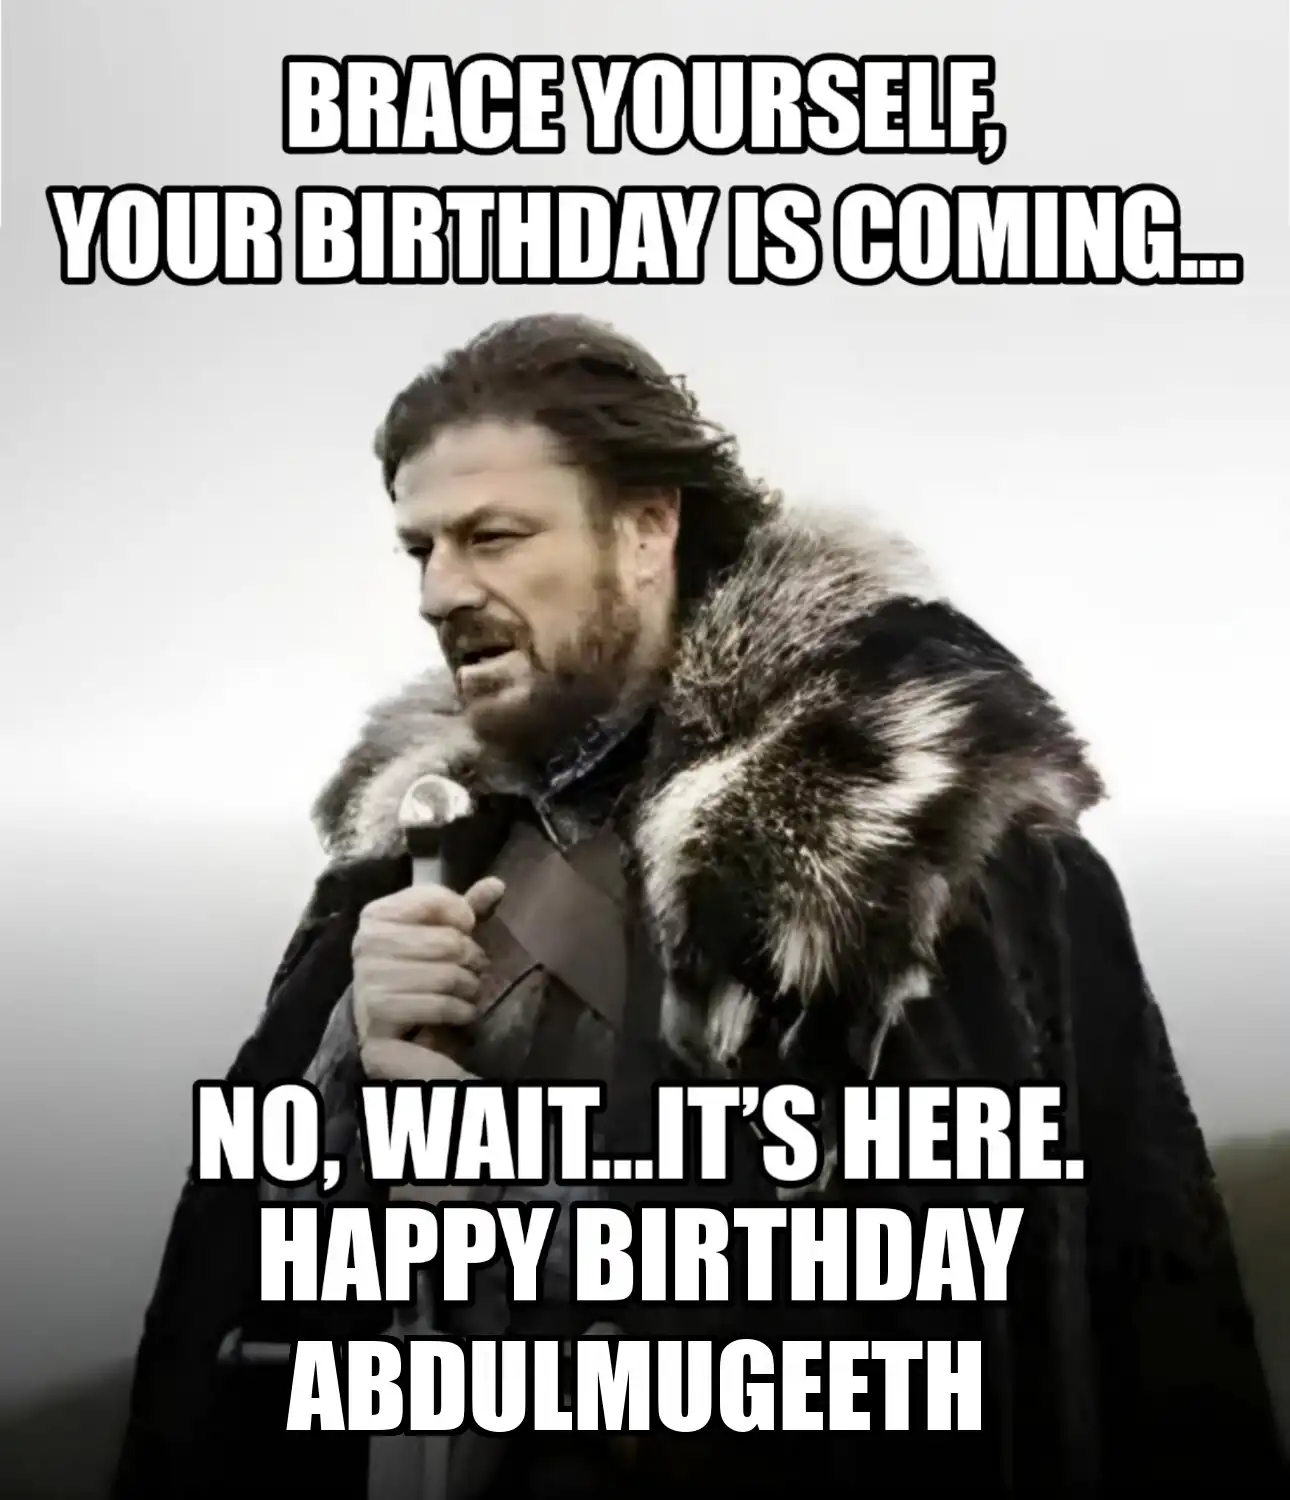 Happy Birthday Abdulmugeeth Brace Yourself Your Birthday Is Coming Meme